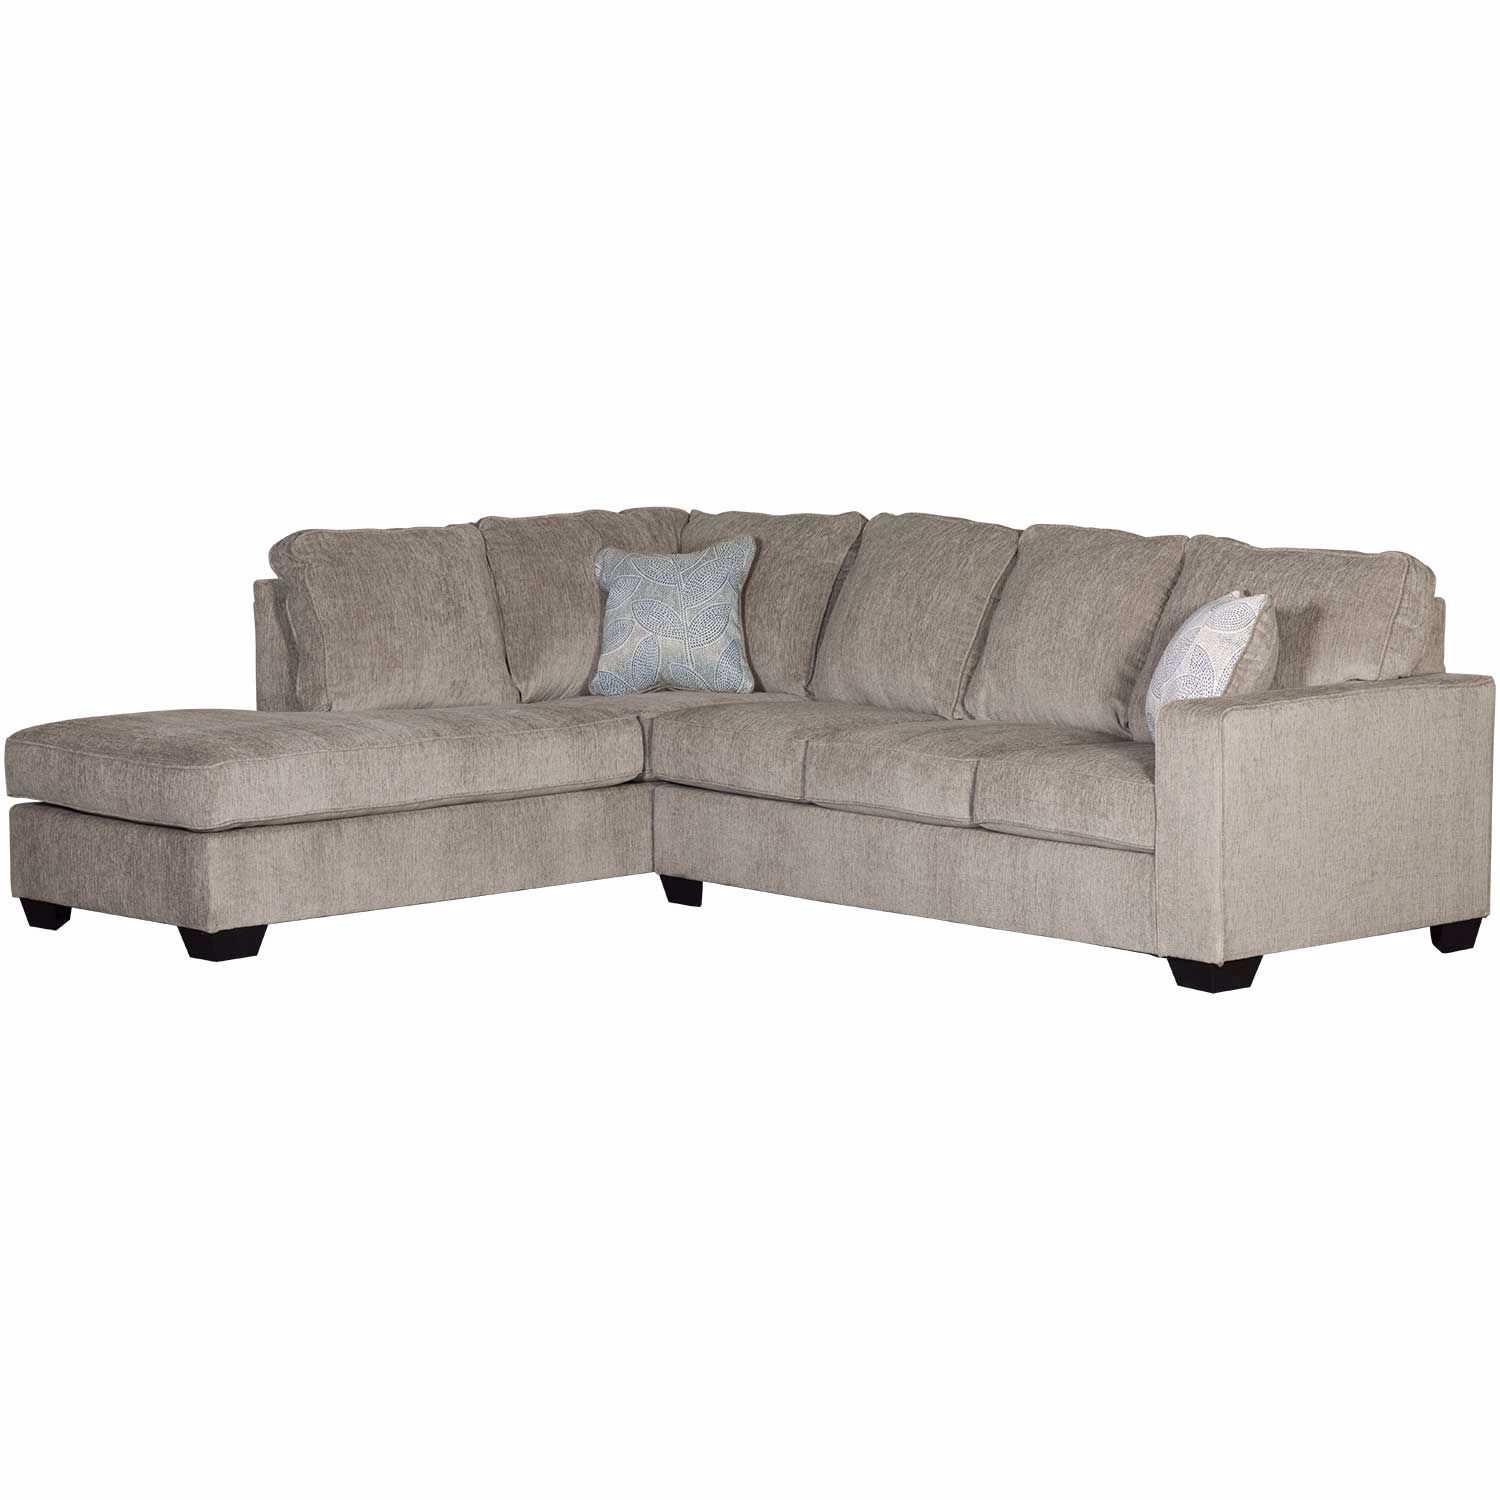 JLXMAXLJ 2 Pack Sofa Snap Sectional Sofa Interlocking Sectional Couch